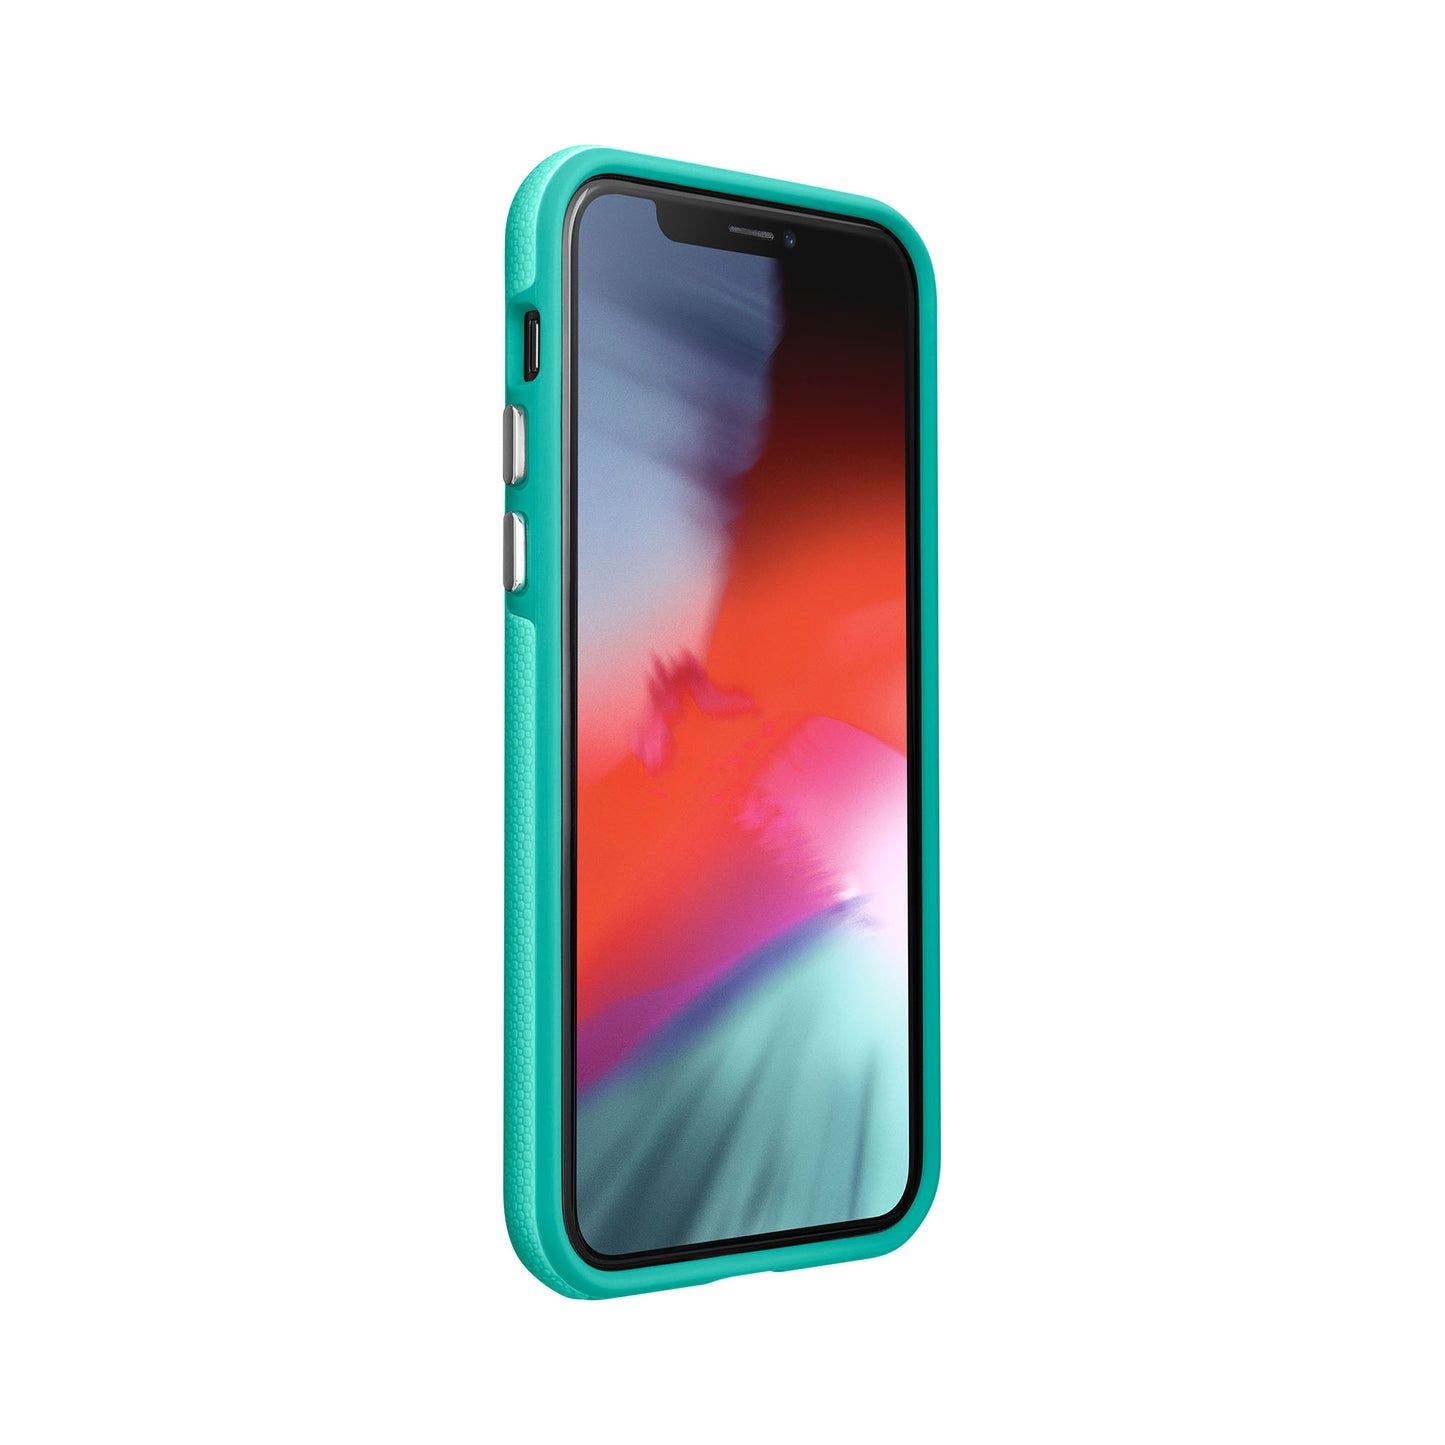 LAUT Shield for iPhone 11 Pro Max - Mint